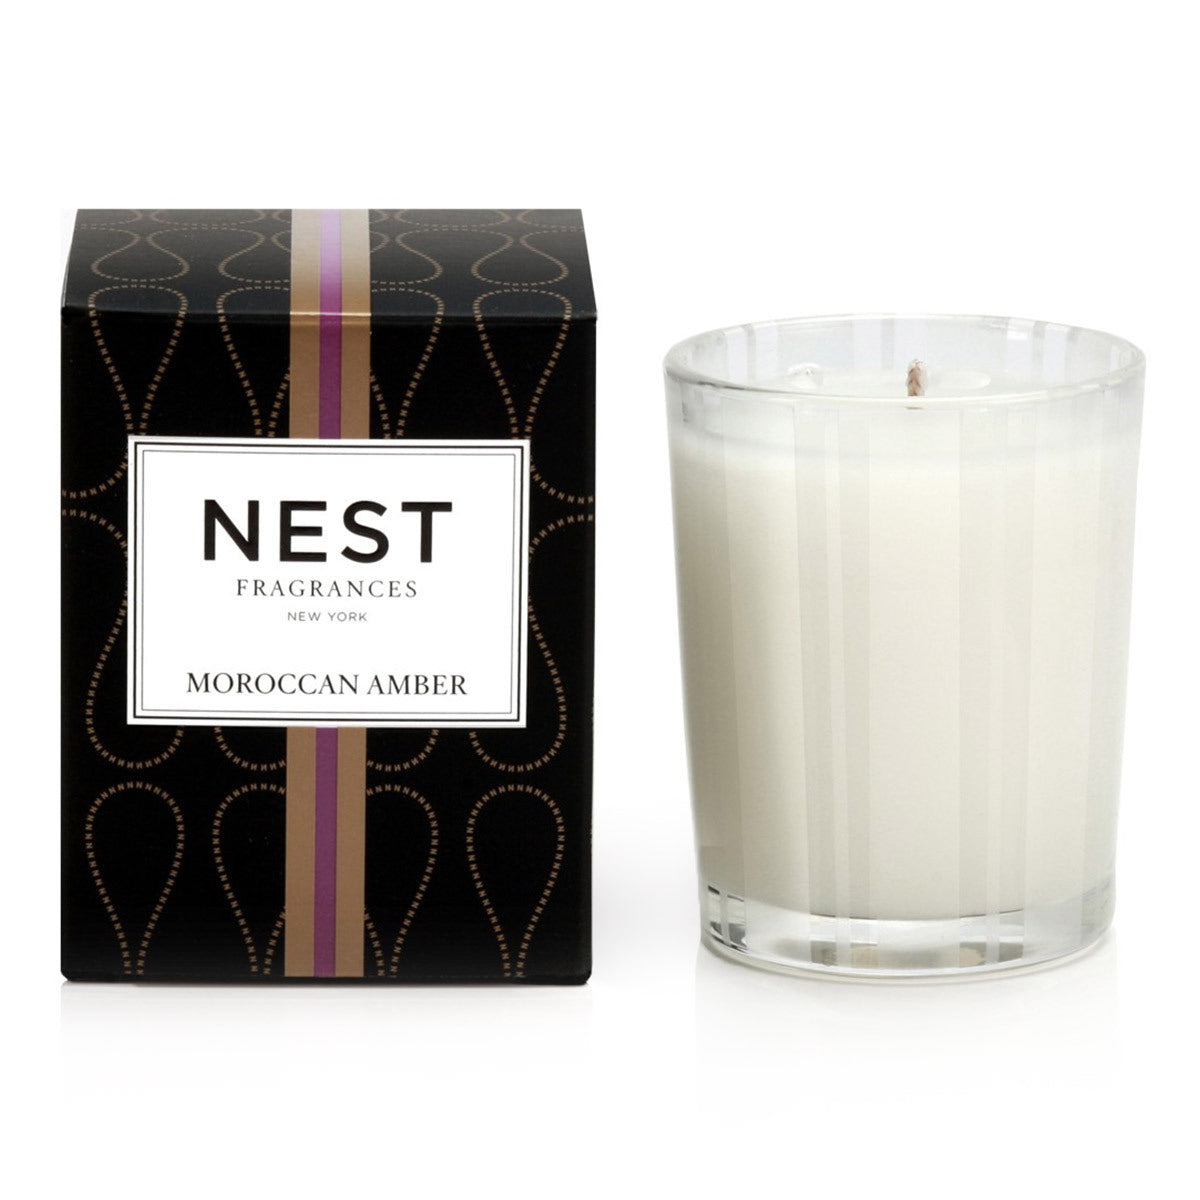 Nest Fragrances Moroccan Amber Candle (2 oz) #10067455 photo